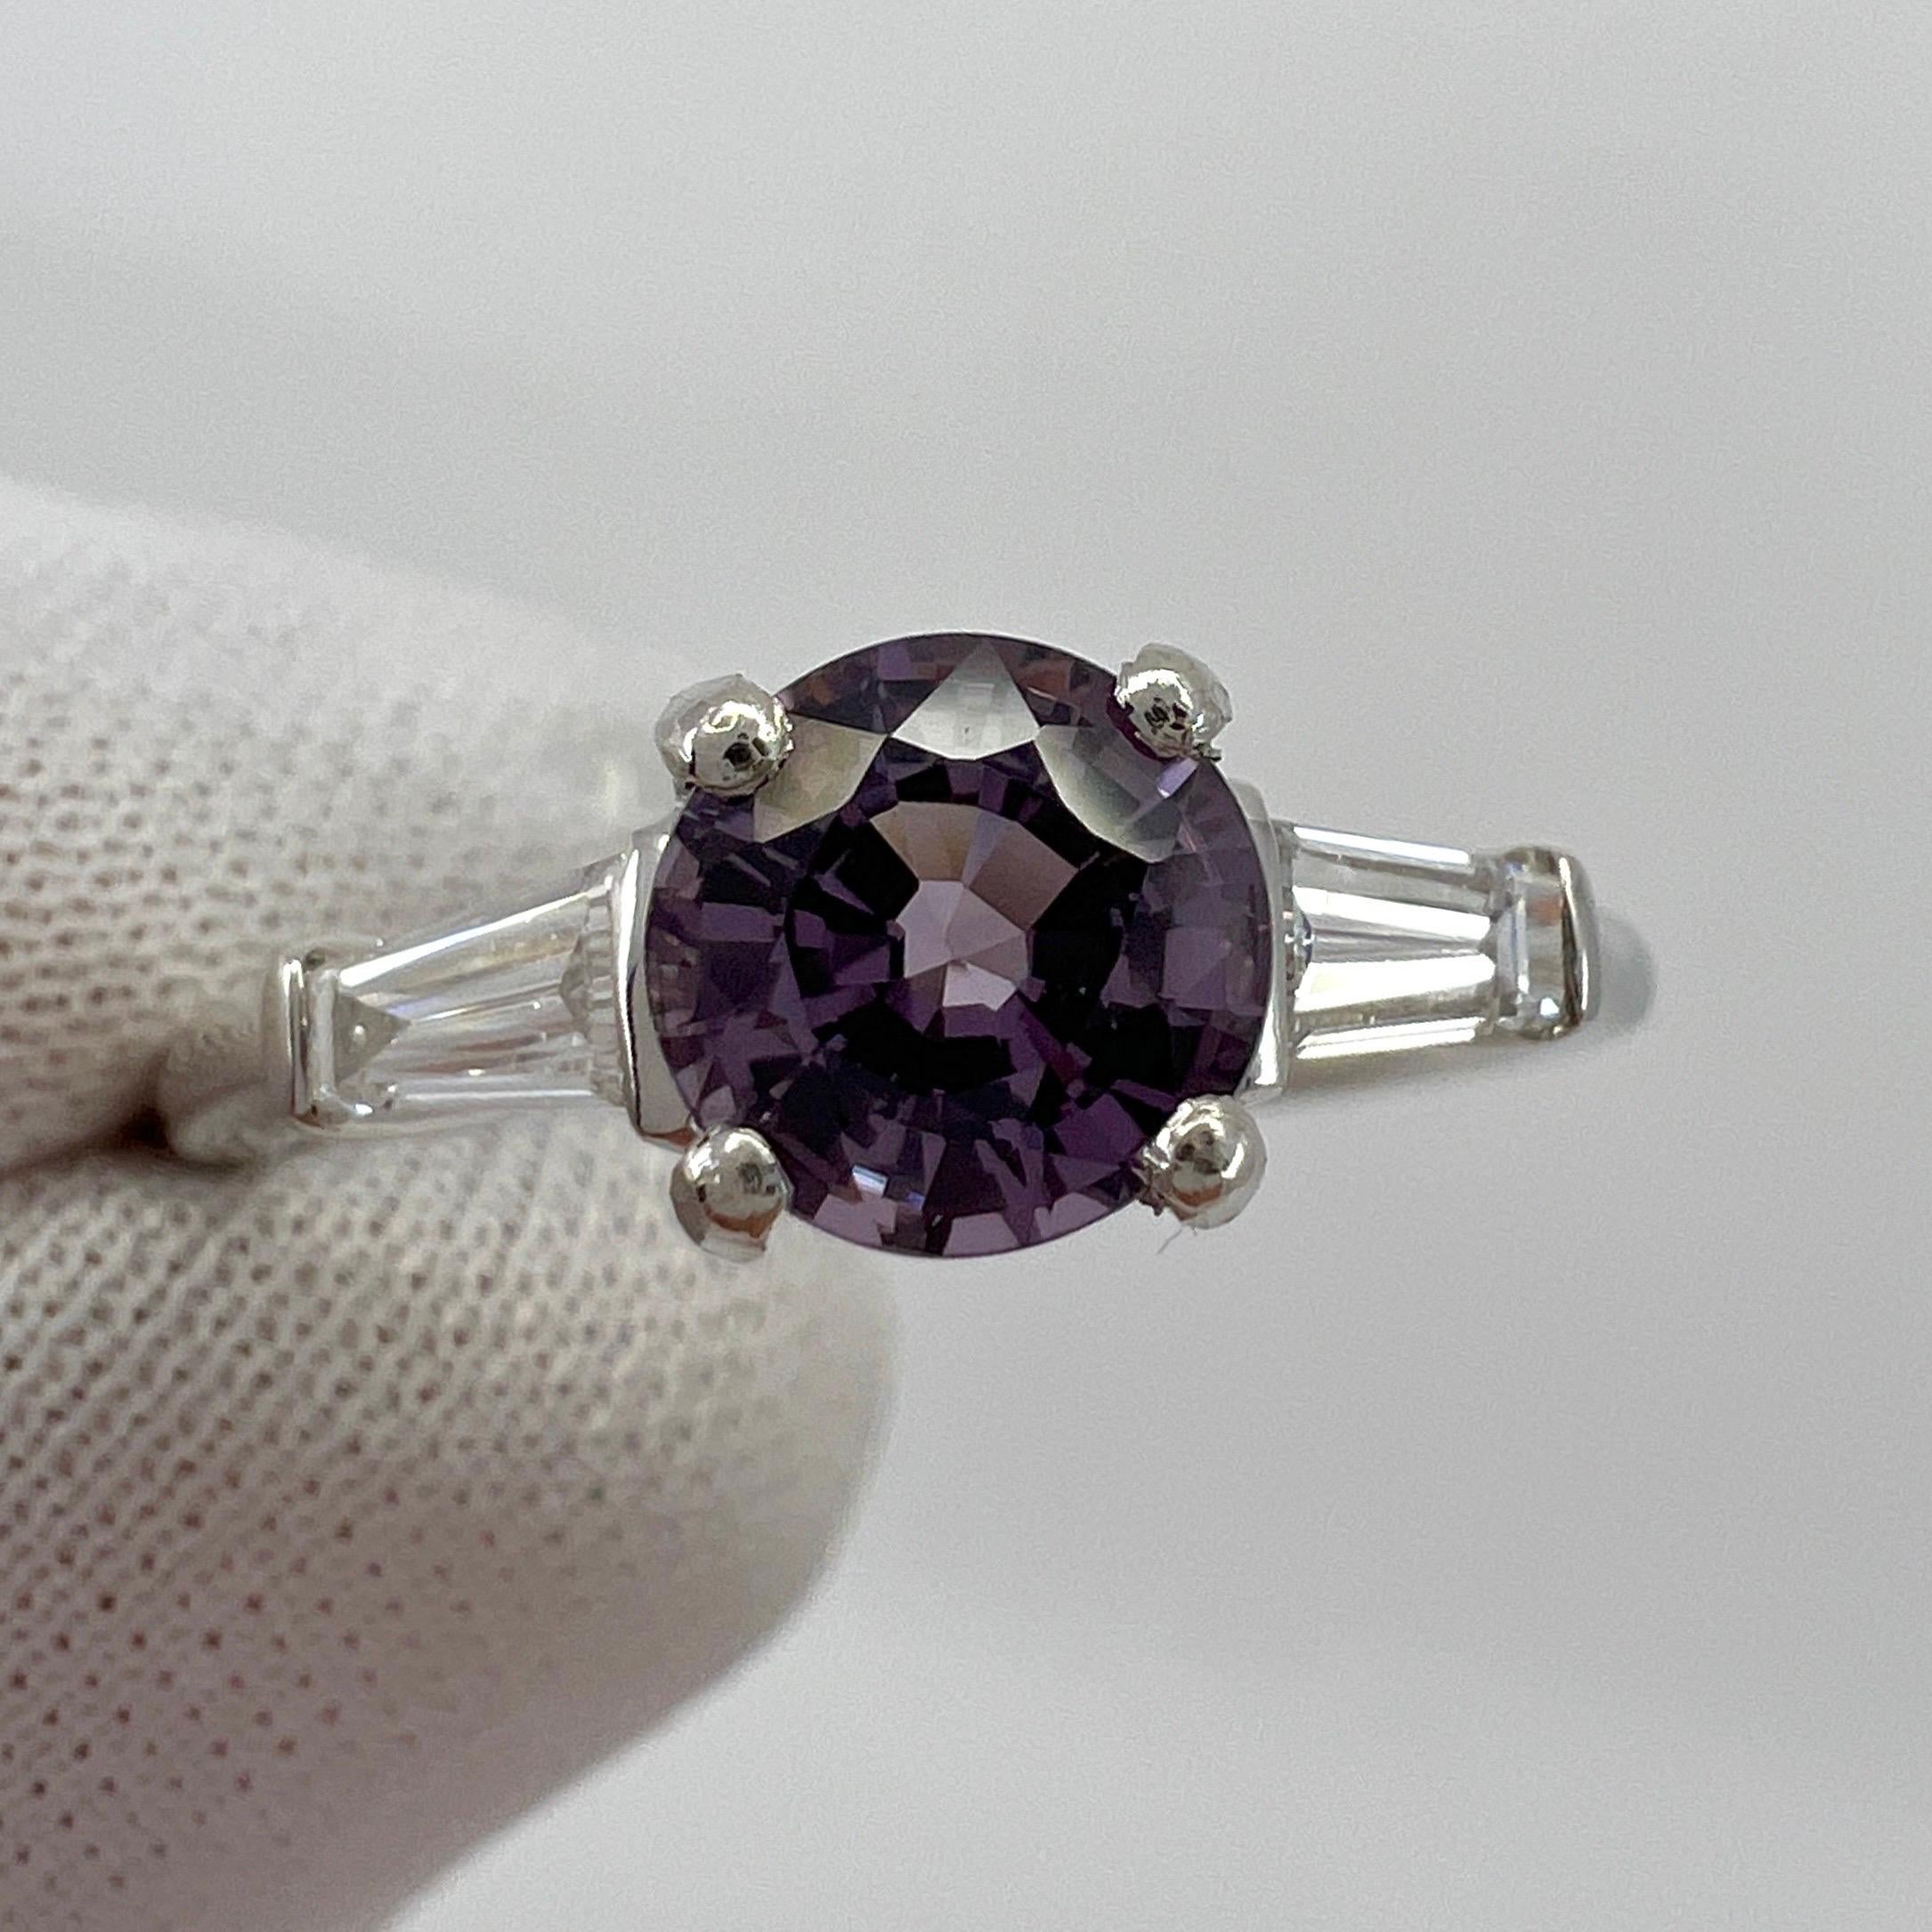 Natural Vivid Lilac Purple Spinel & Diamond Platinum Round Cut Three Stone Ring. 1.20 Total carat.

1.00 Carat natural spinel with a unique vivid purple lilac colour and excellent clarity. Very clean stone.

The spinel measures 6mm with an excellent